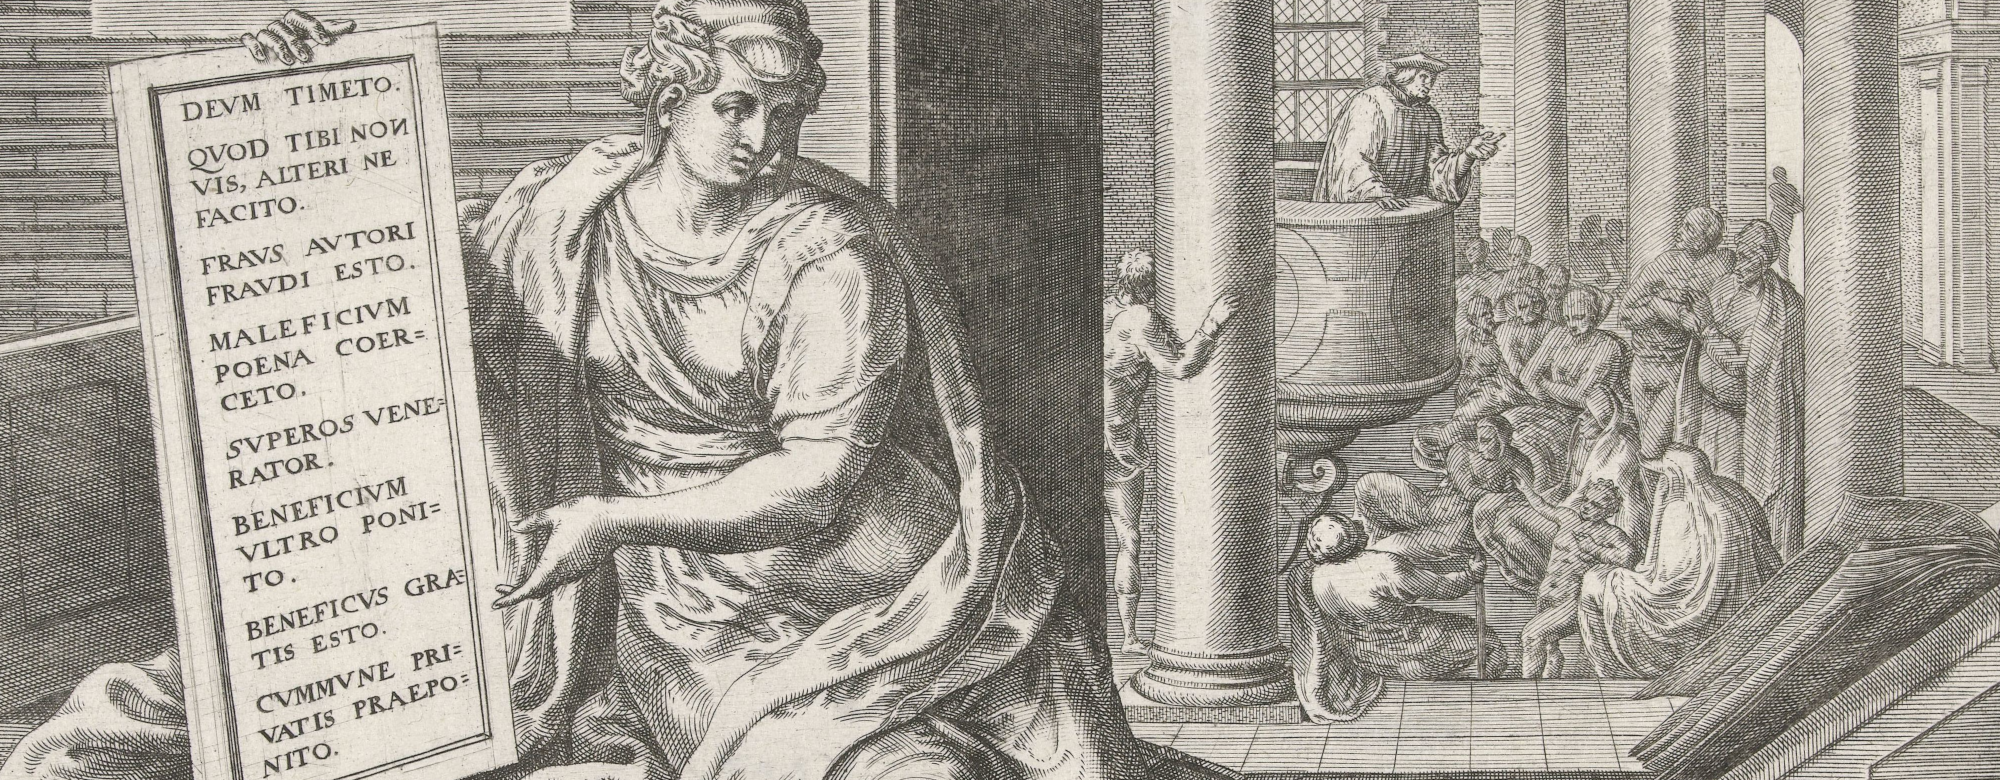 Print depicting the following: In the foreground the personification of politics (Politia). She is holding a text board with a list of commandments and warnings. Political and legal notebooks lie around her. In the background a church room with a preacher (?) in a pulpit. The print has a Latin caption and is part of a series of prints about human activities.